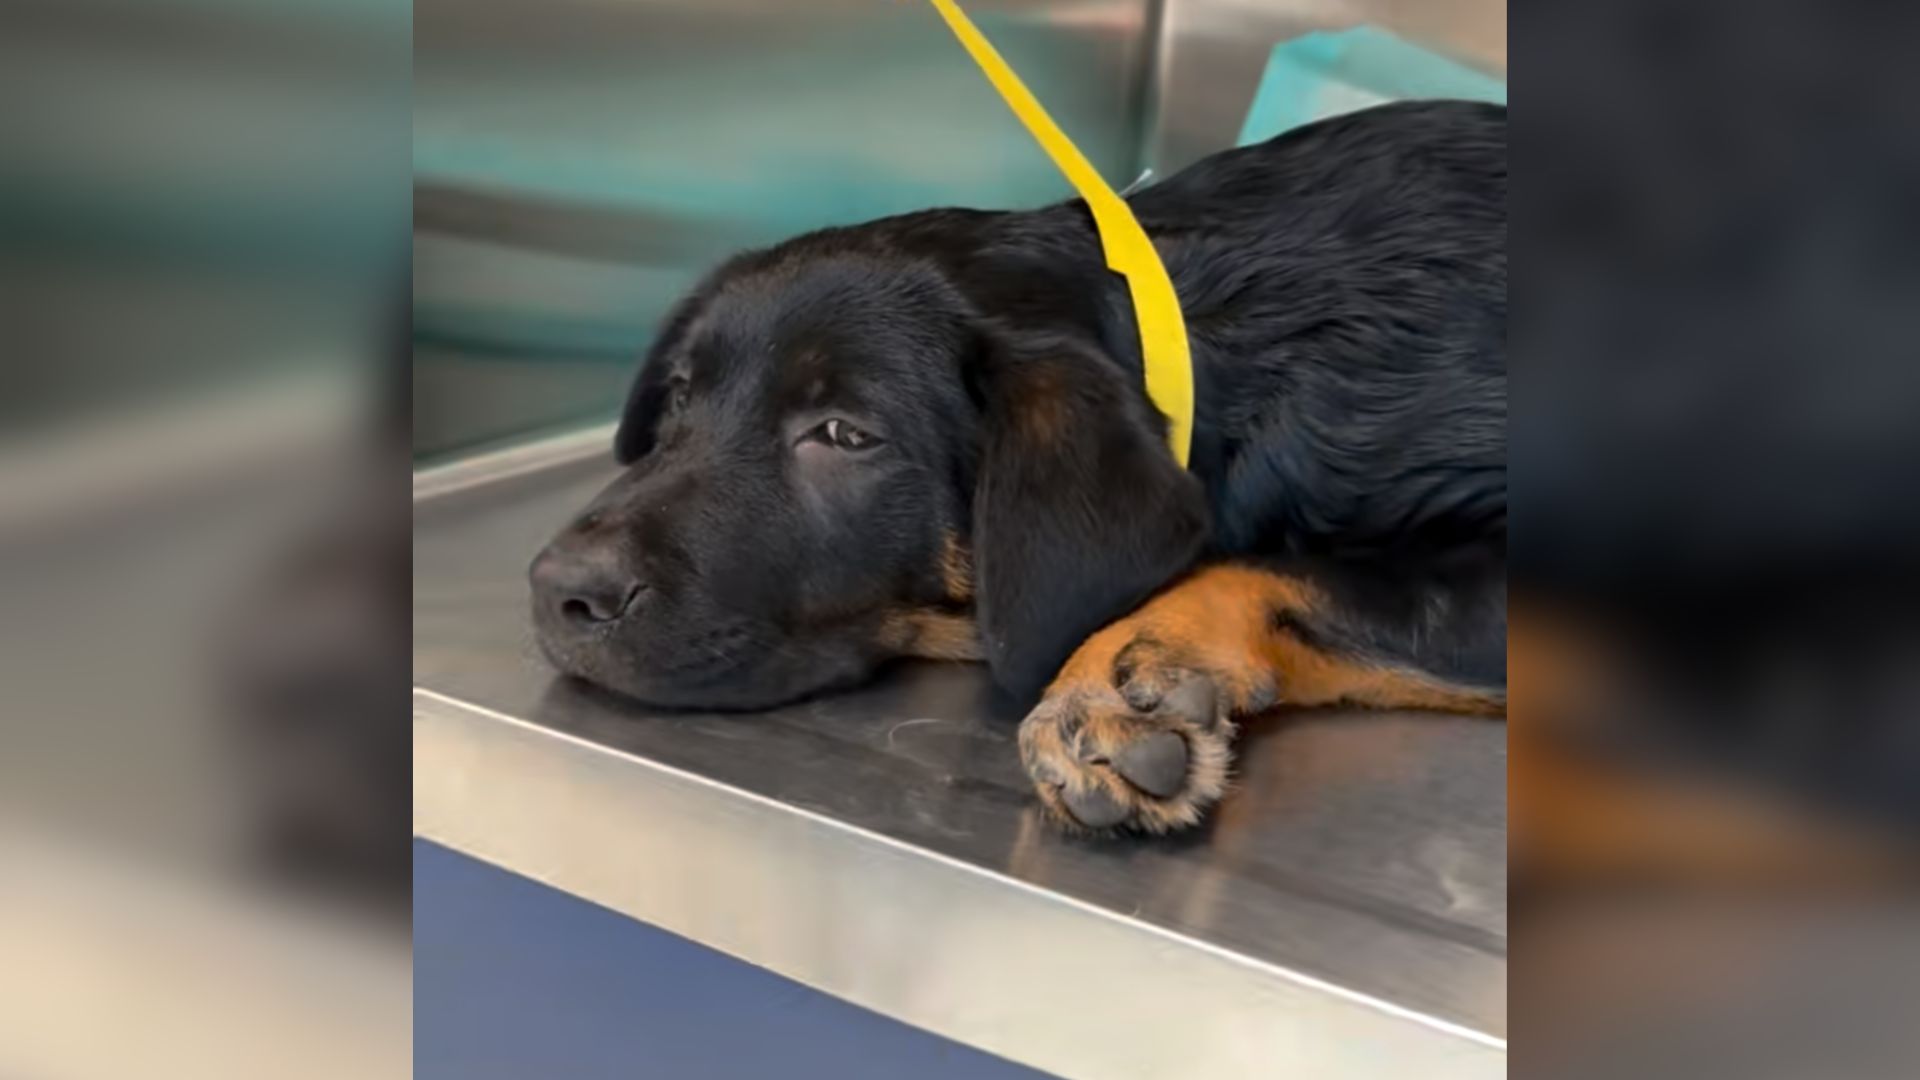 12-Week-Old Puppy With Broken Leg Brought To Vet To Be Euthanized Gets Saved By A Nurse